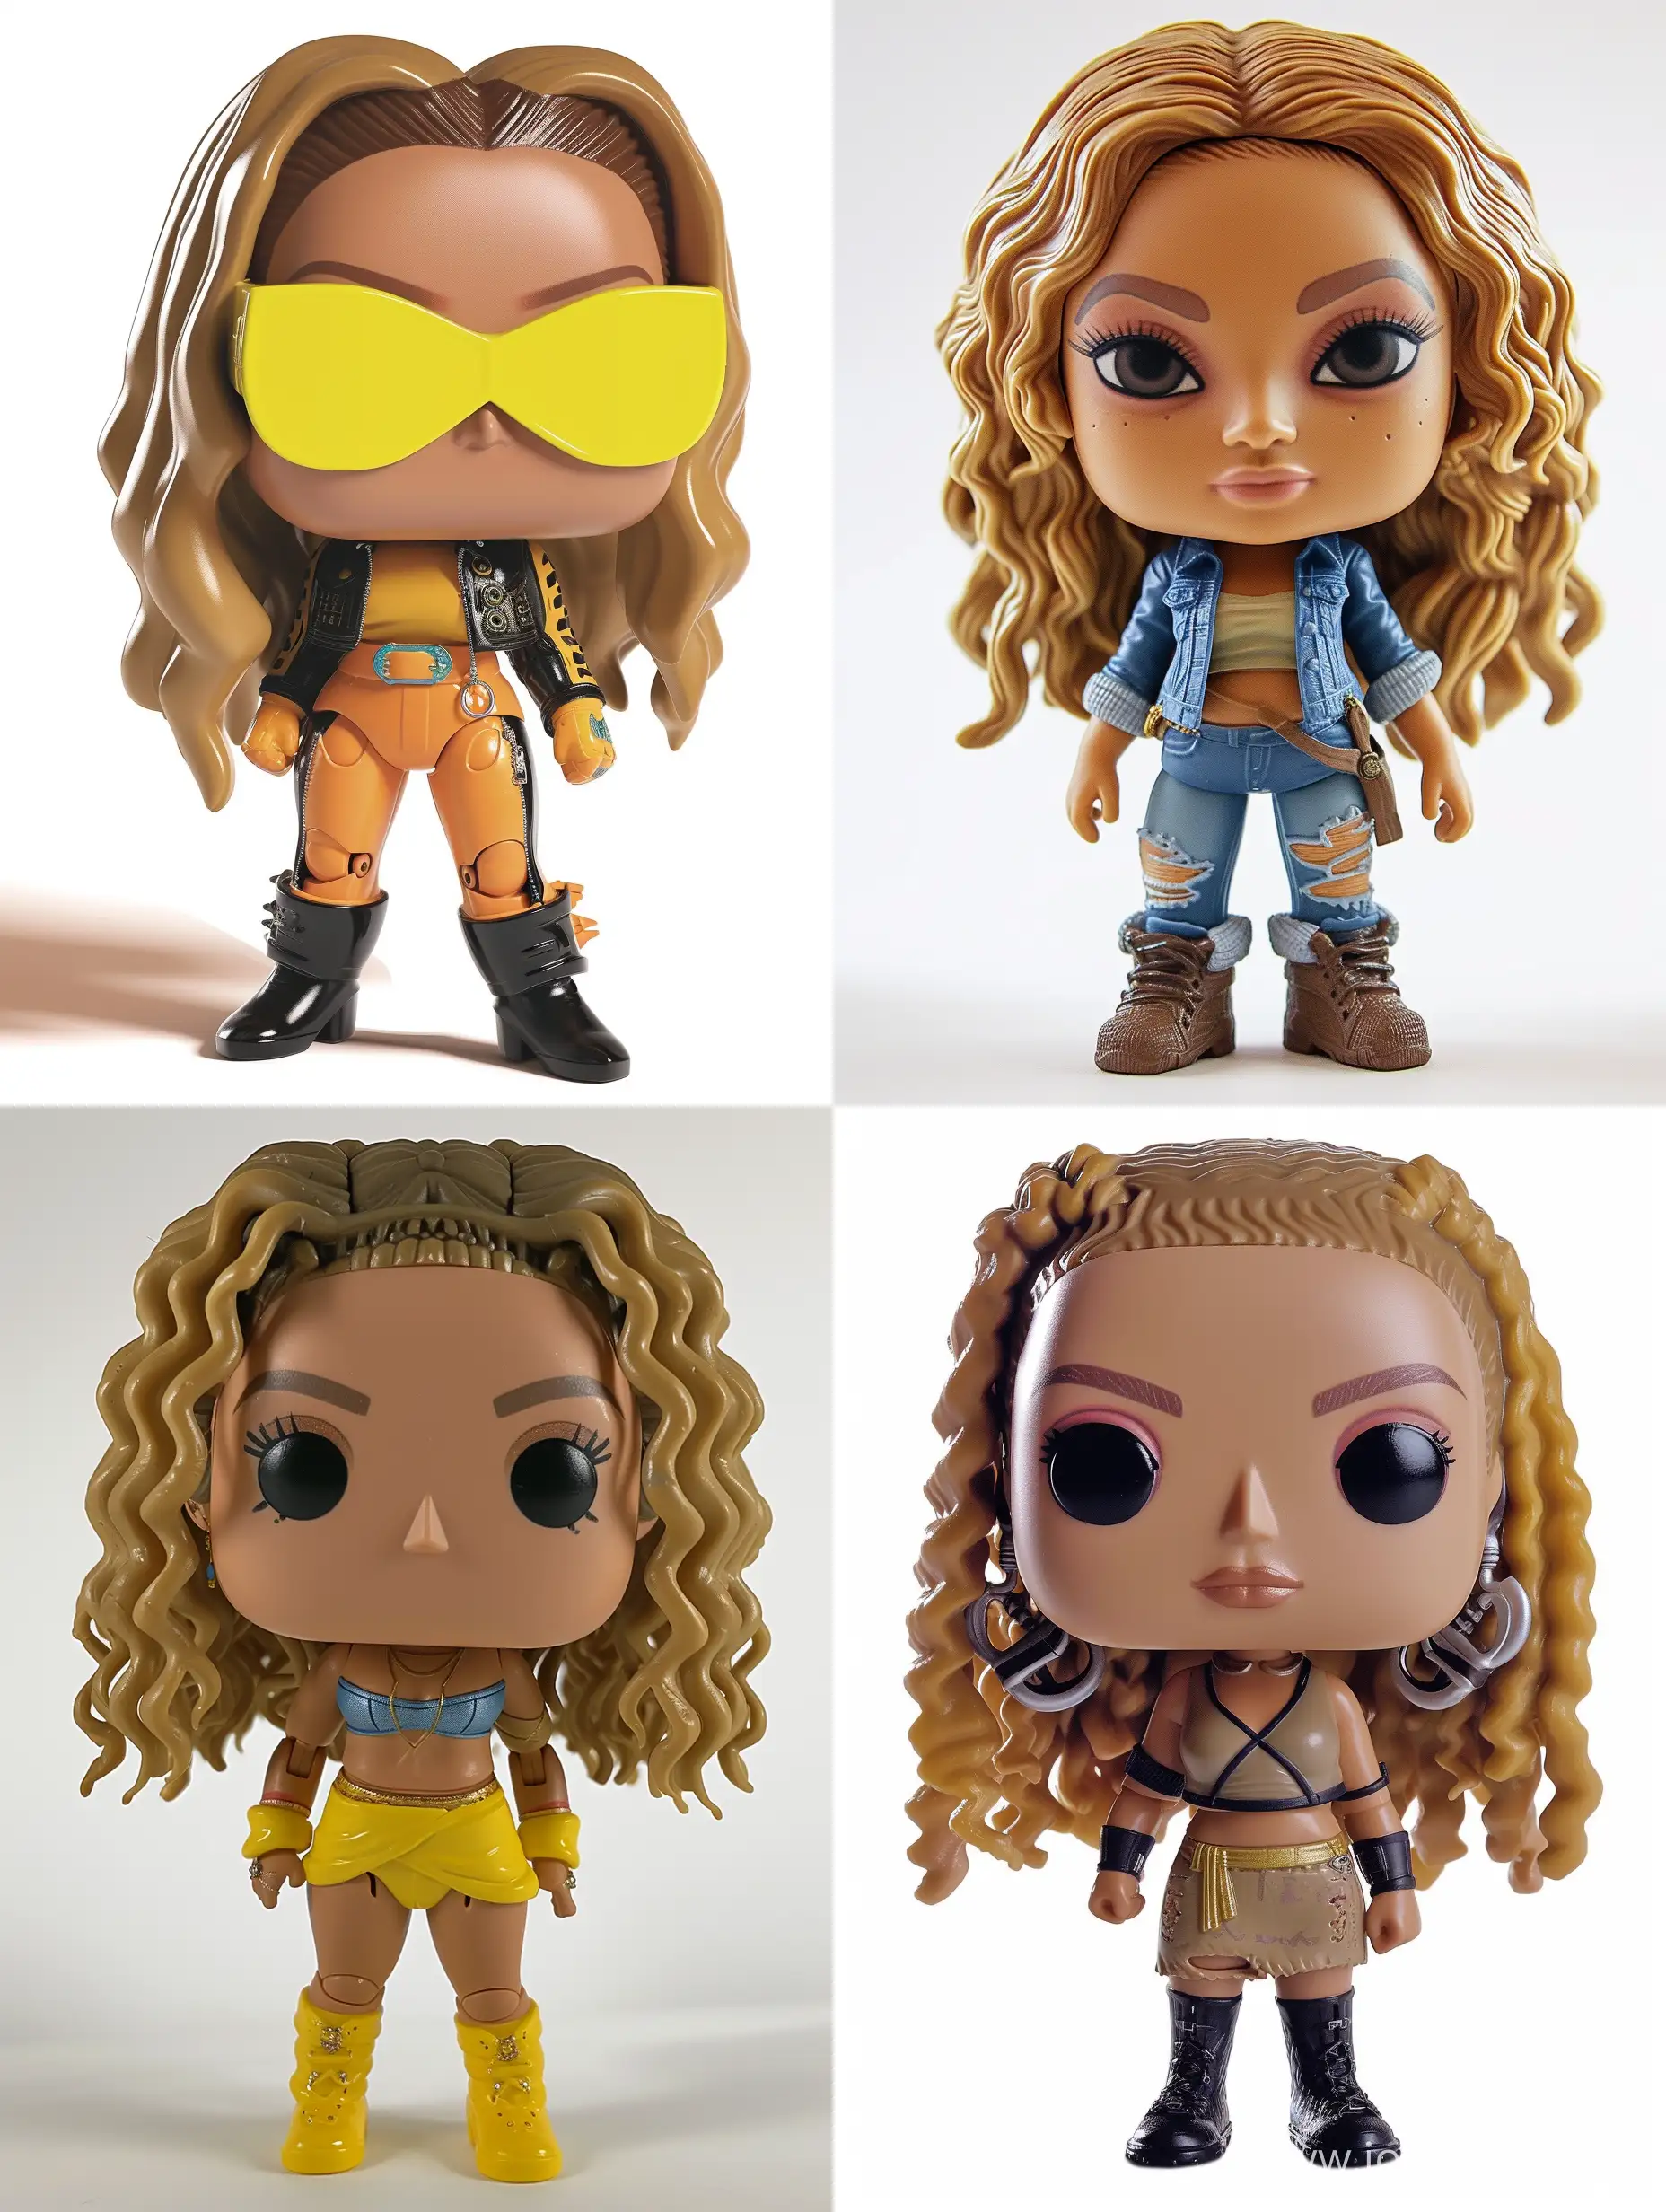 Beyoncé in the style of a funko pop toy.